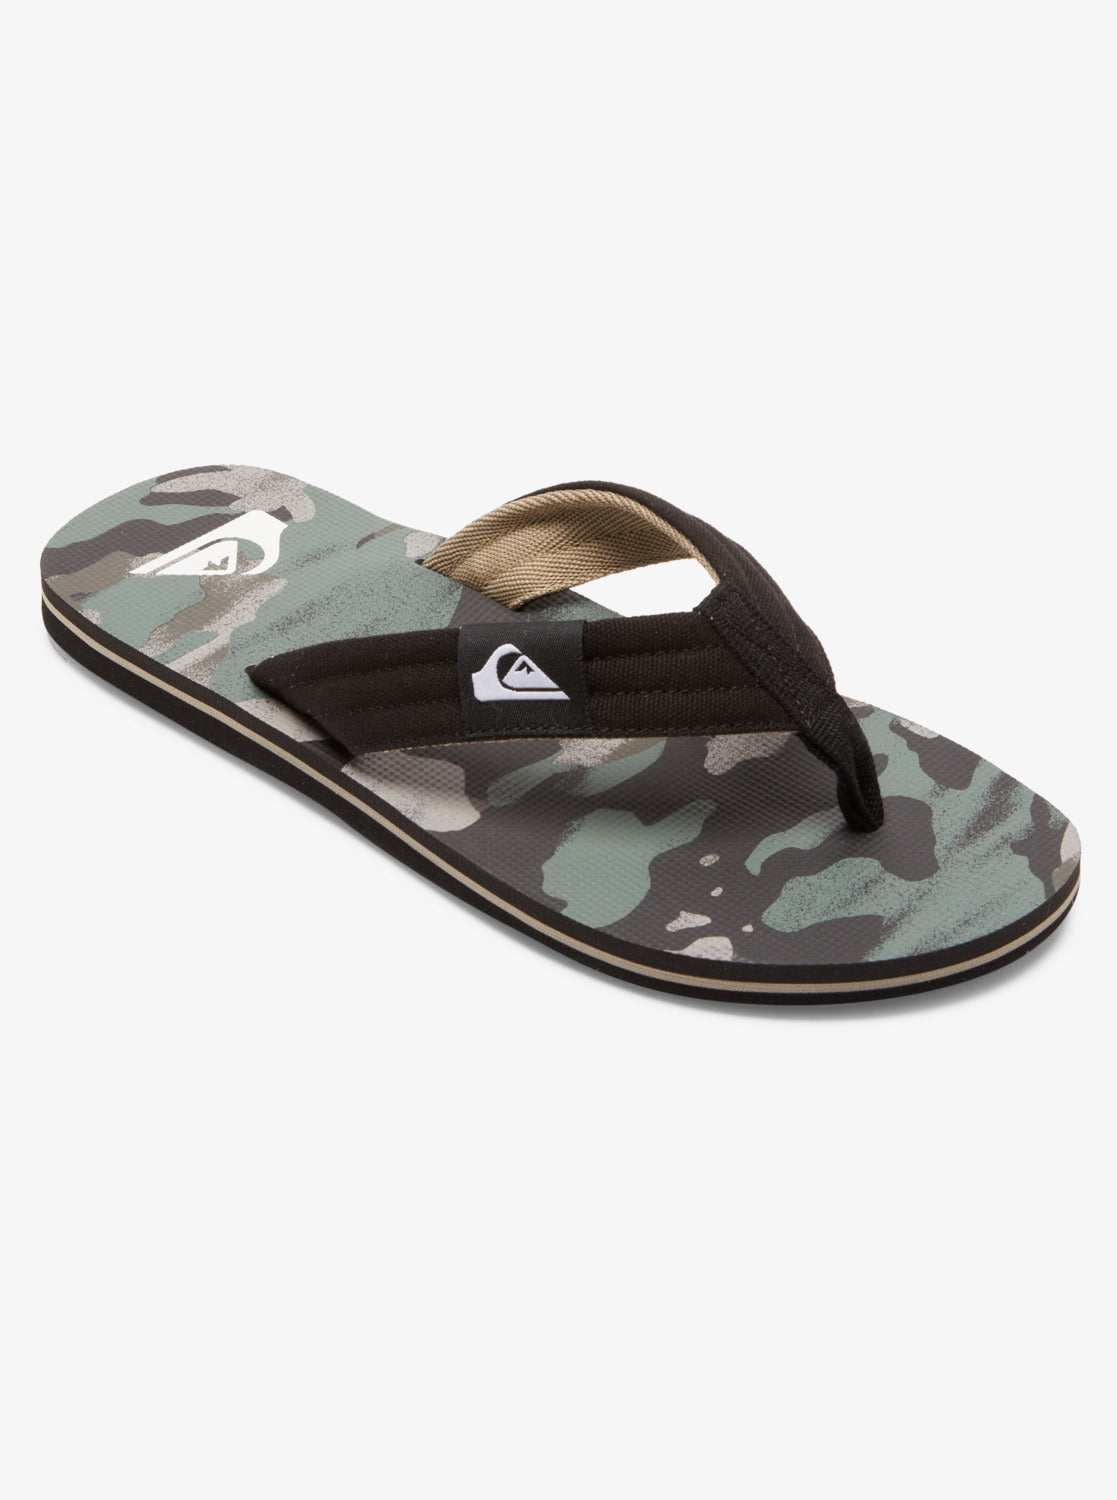 Quiksilver Molokai SANDALS 3 Point FLIP FLOP Thongs SANDAL SHOES Priced  CHEAP Black Size 9 - $29 (57% Off Retail) - From Bully